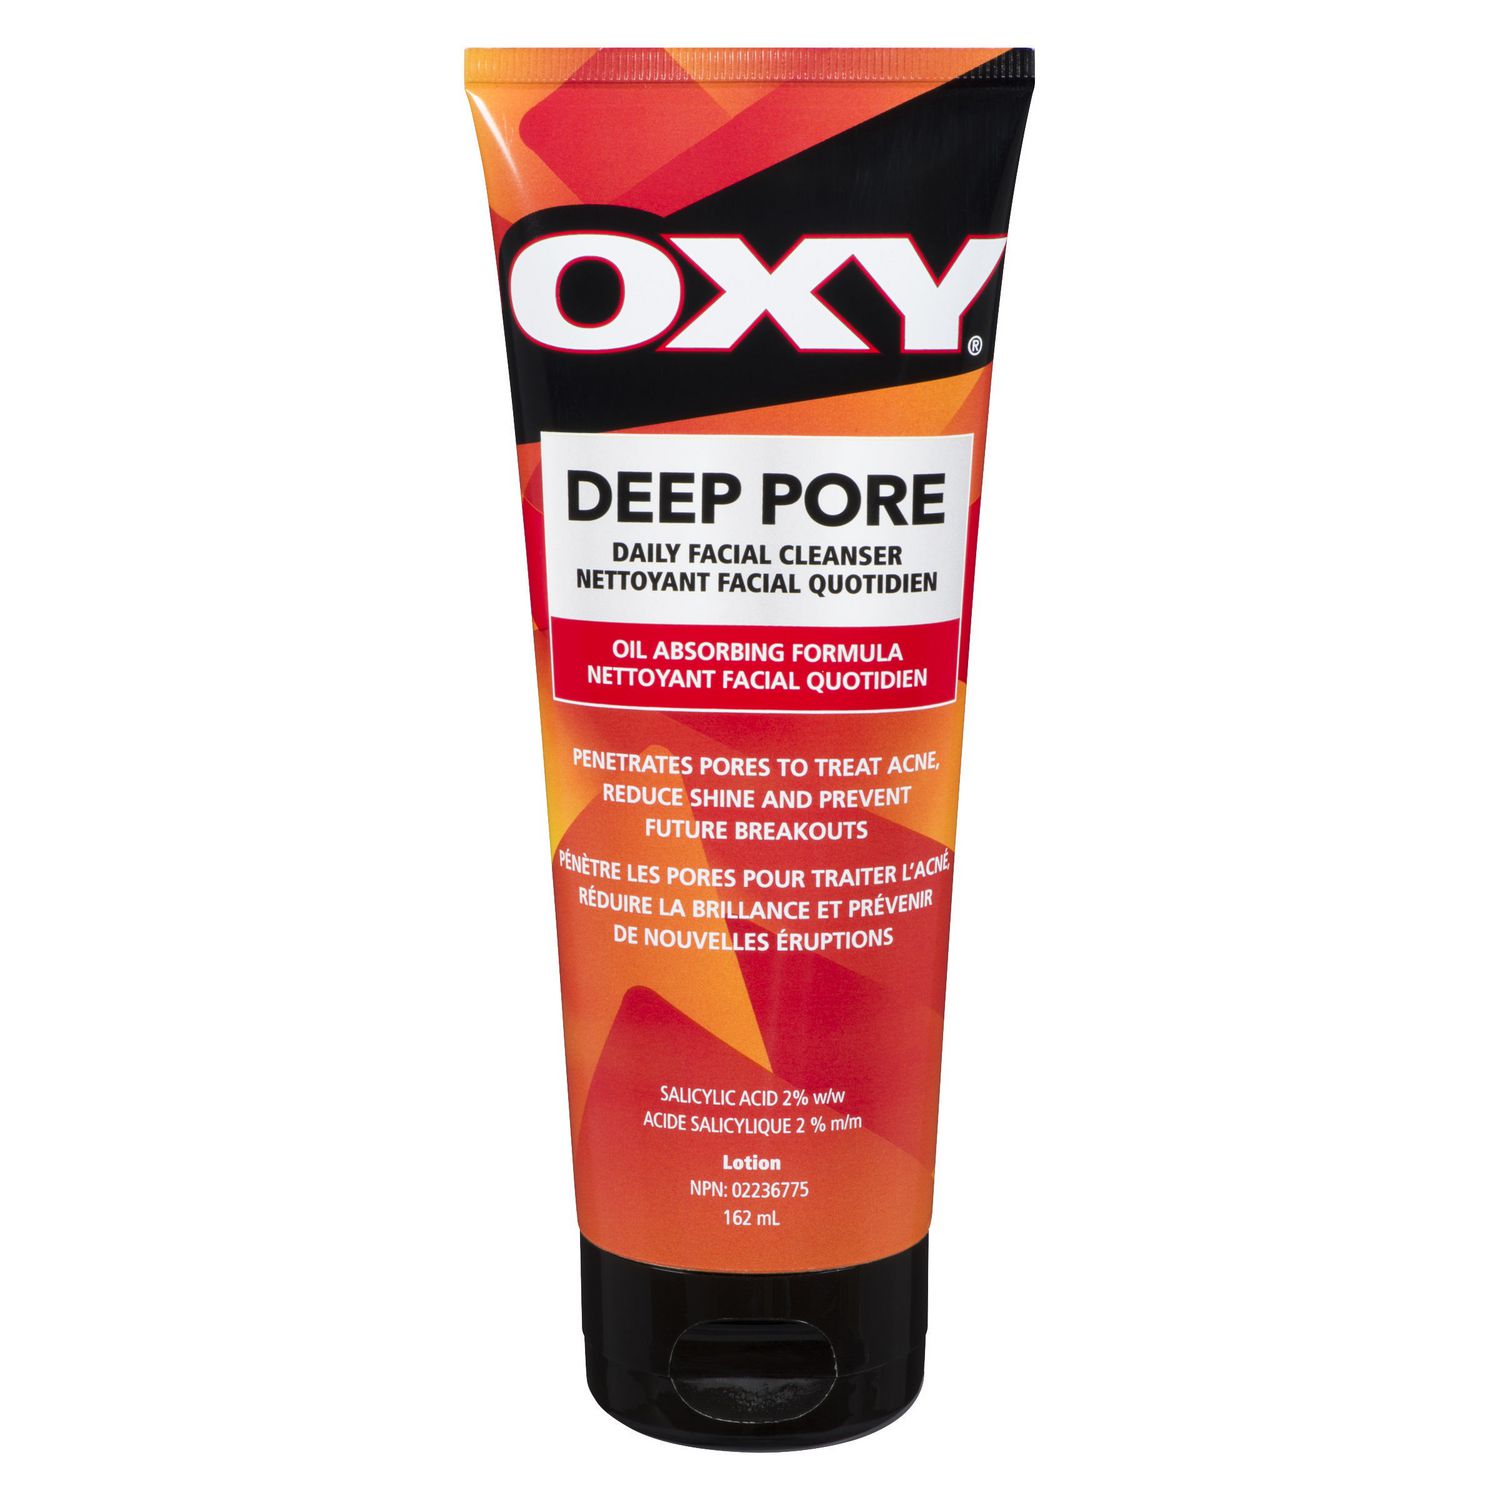 Oxy facial cleaner